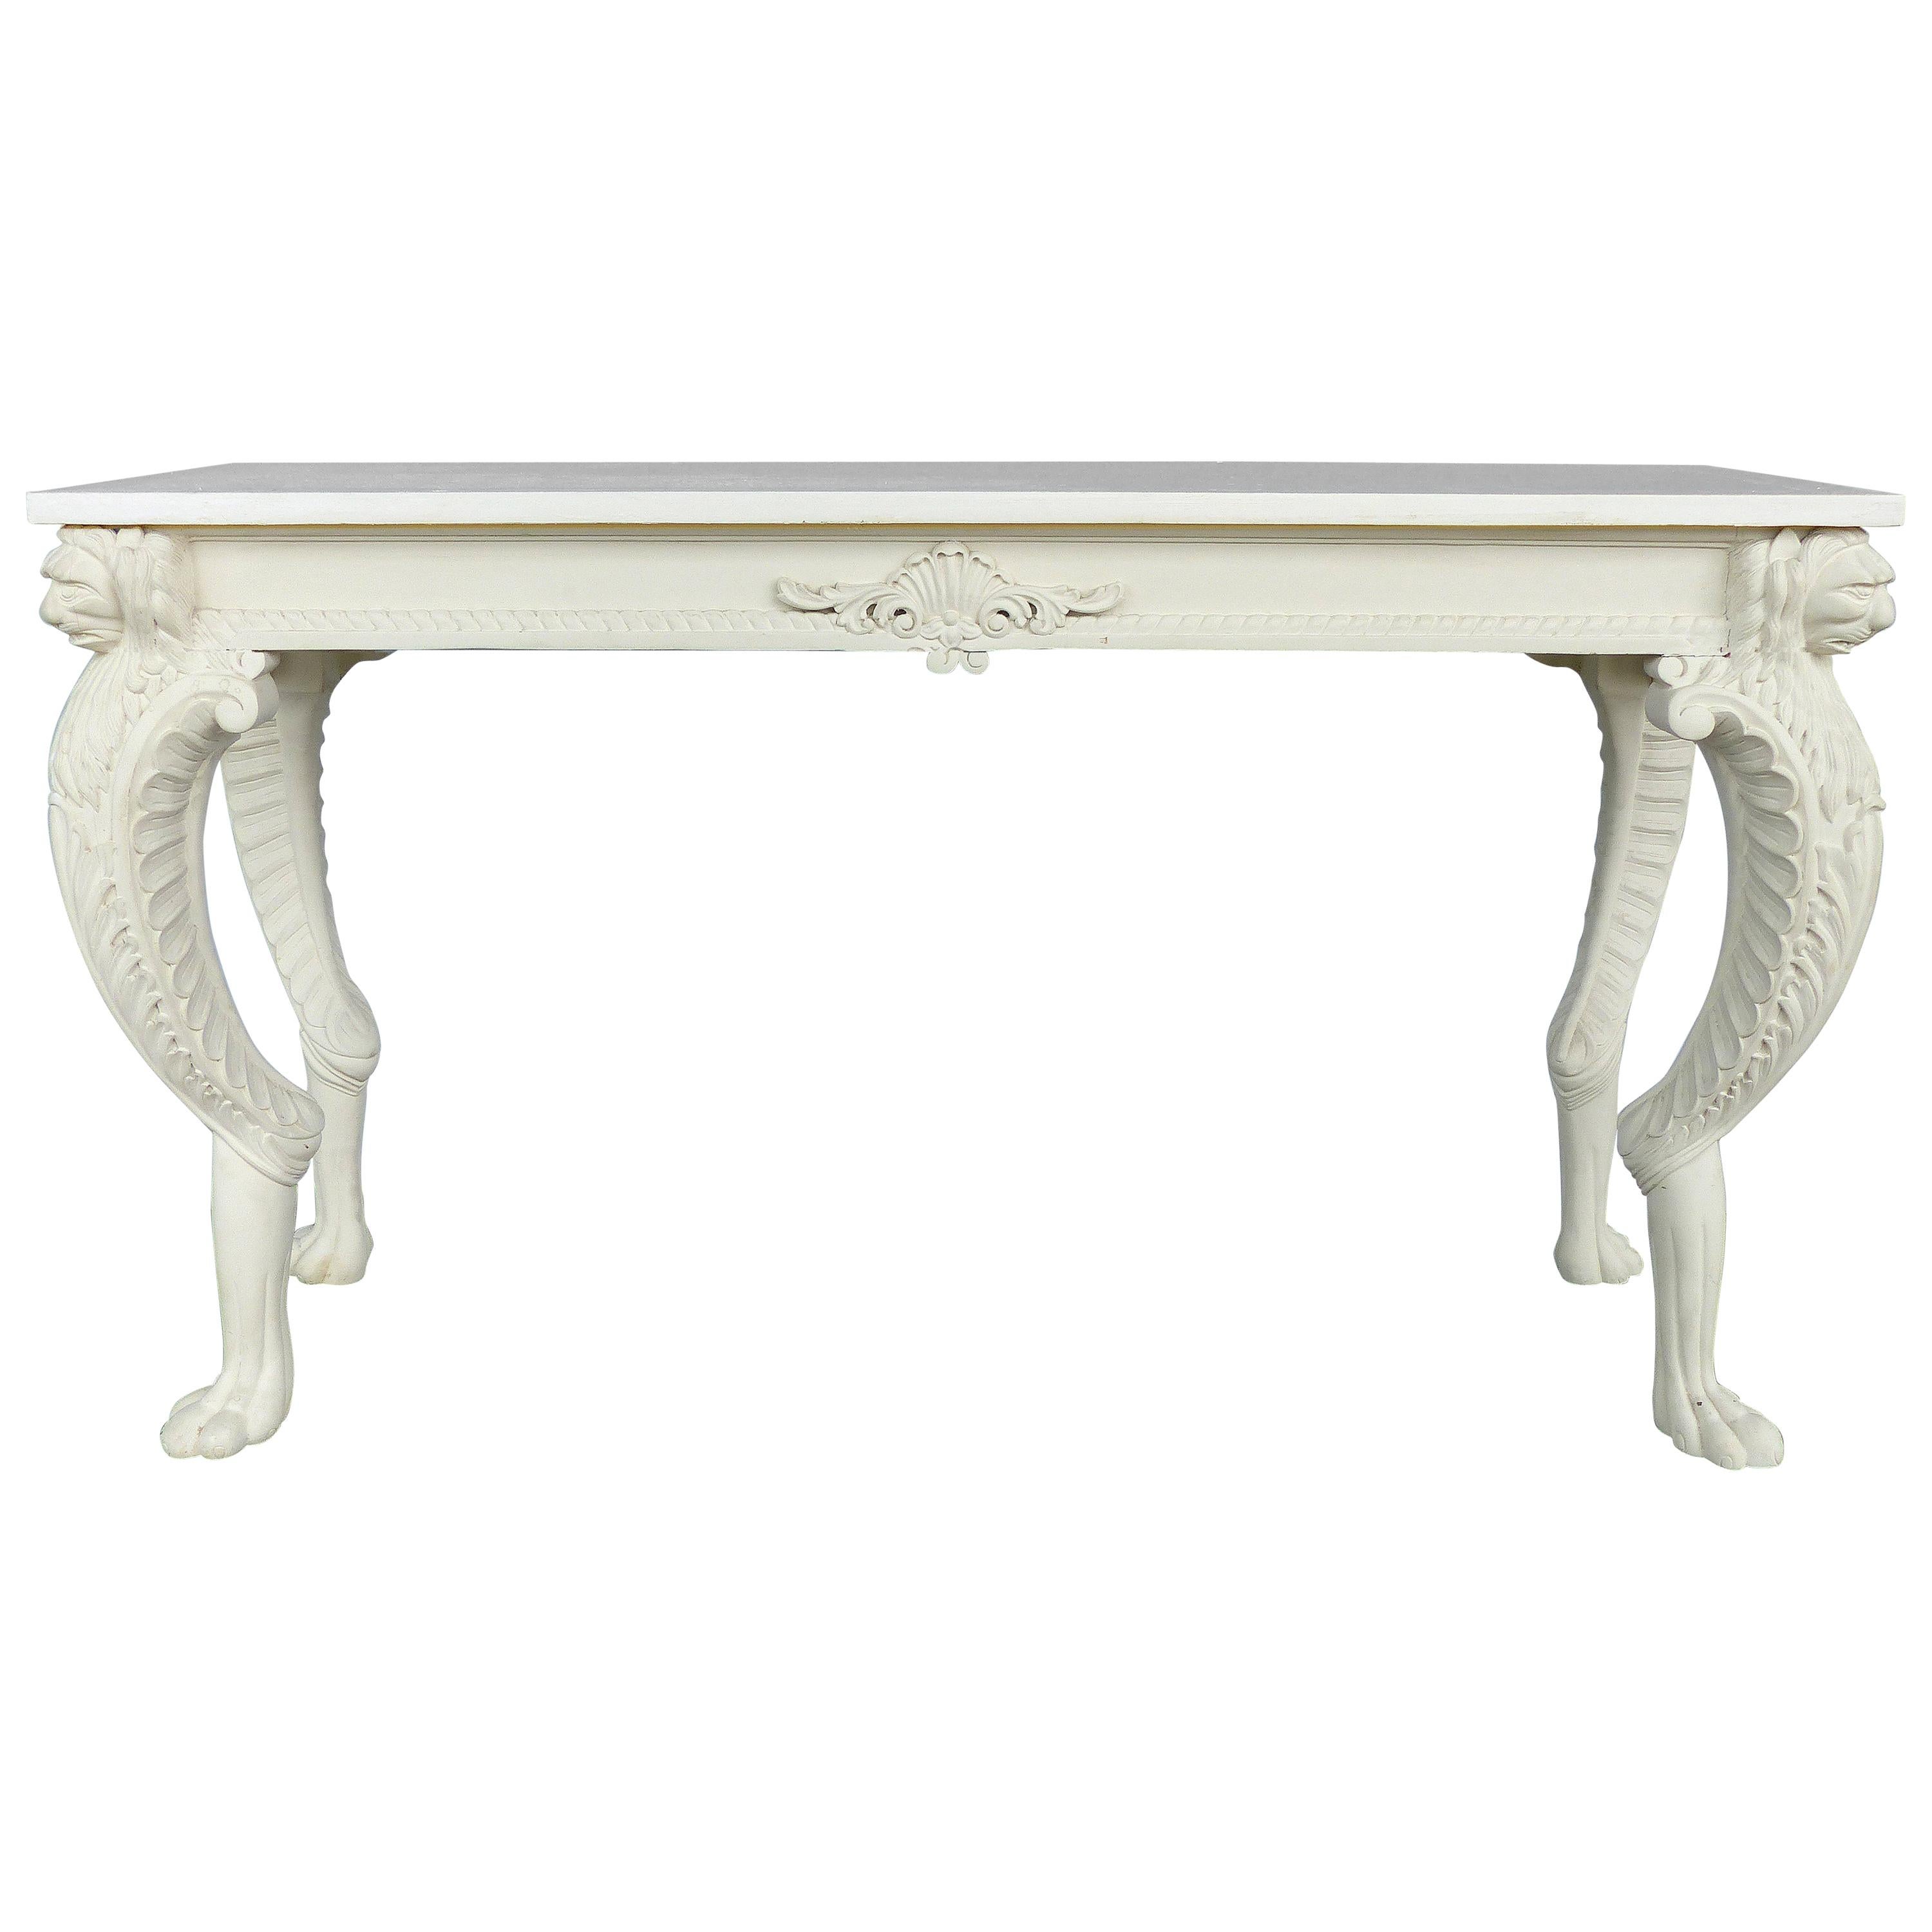 Neoclassical Revival Carved and Painted Wood Console